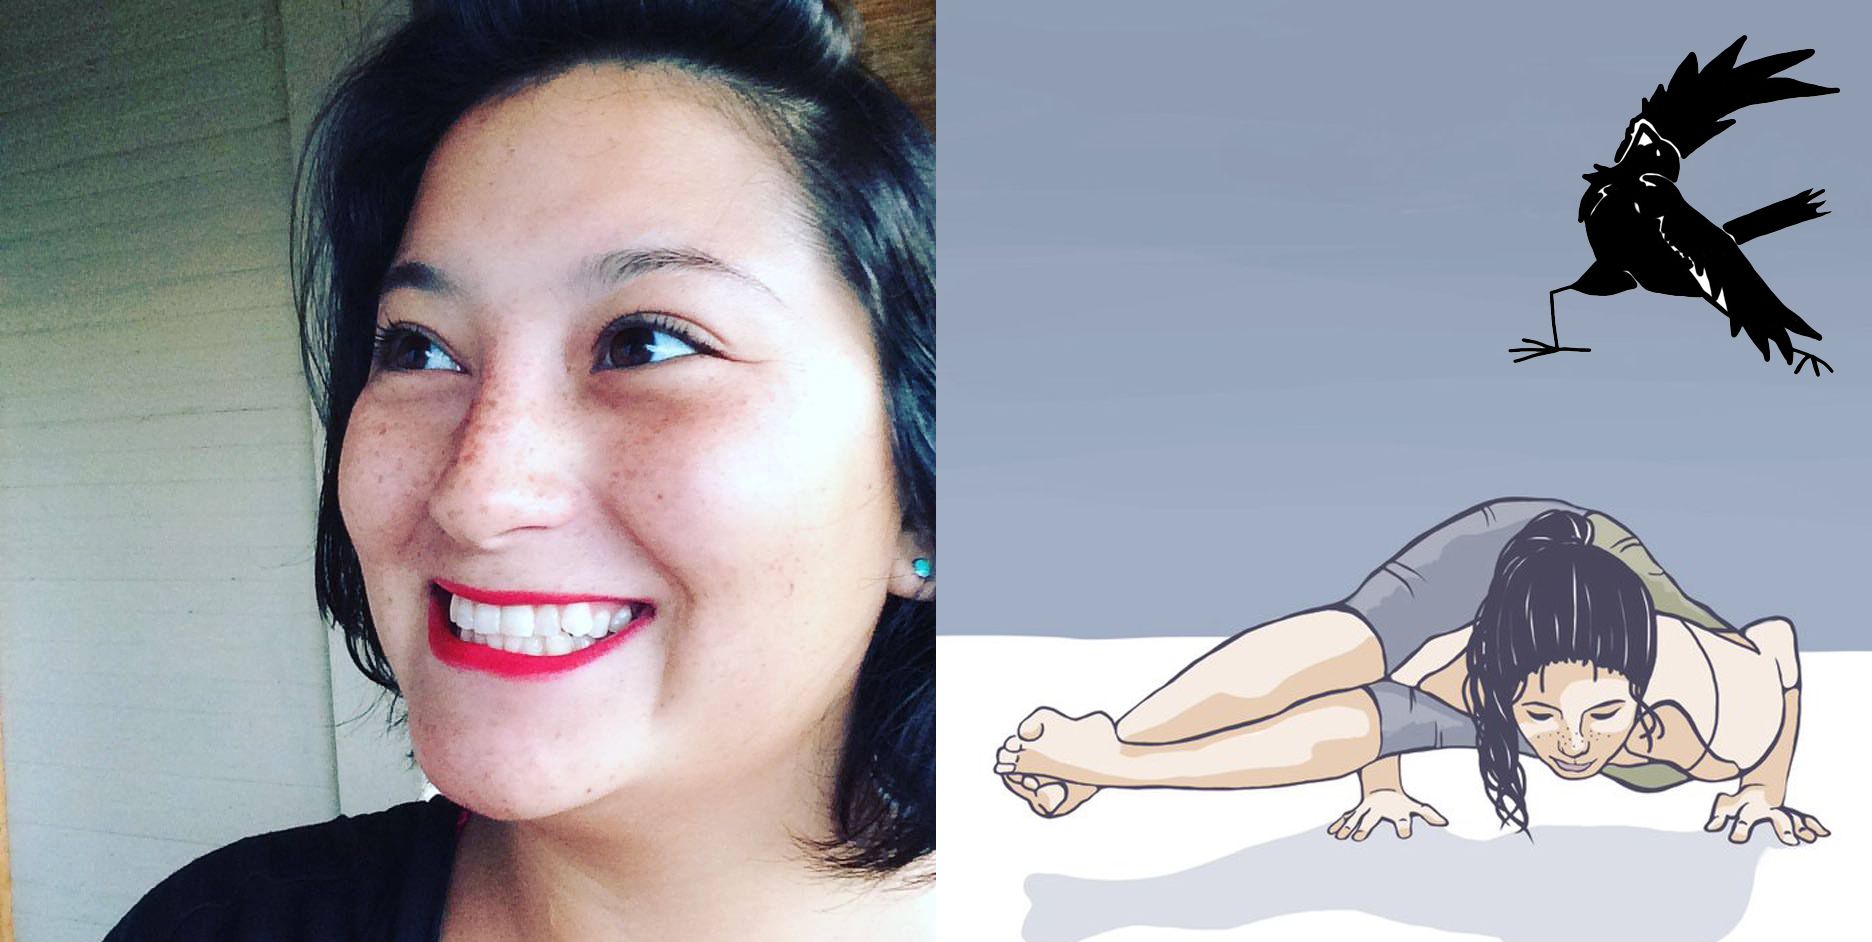 On the left, a photo of a smiling young woman with black hair, on the right, an illustration of a person holding a yoga pose.